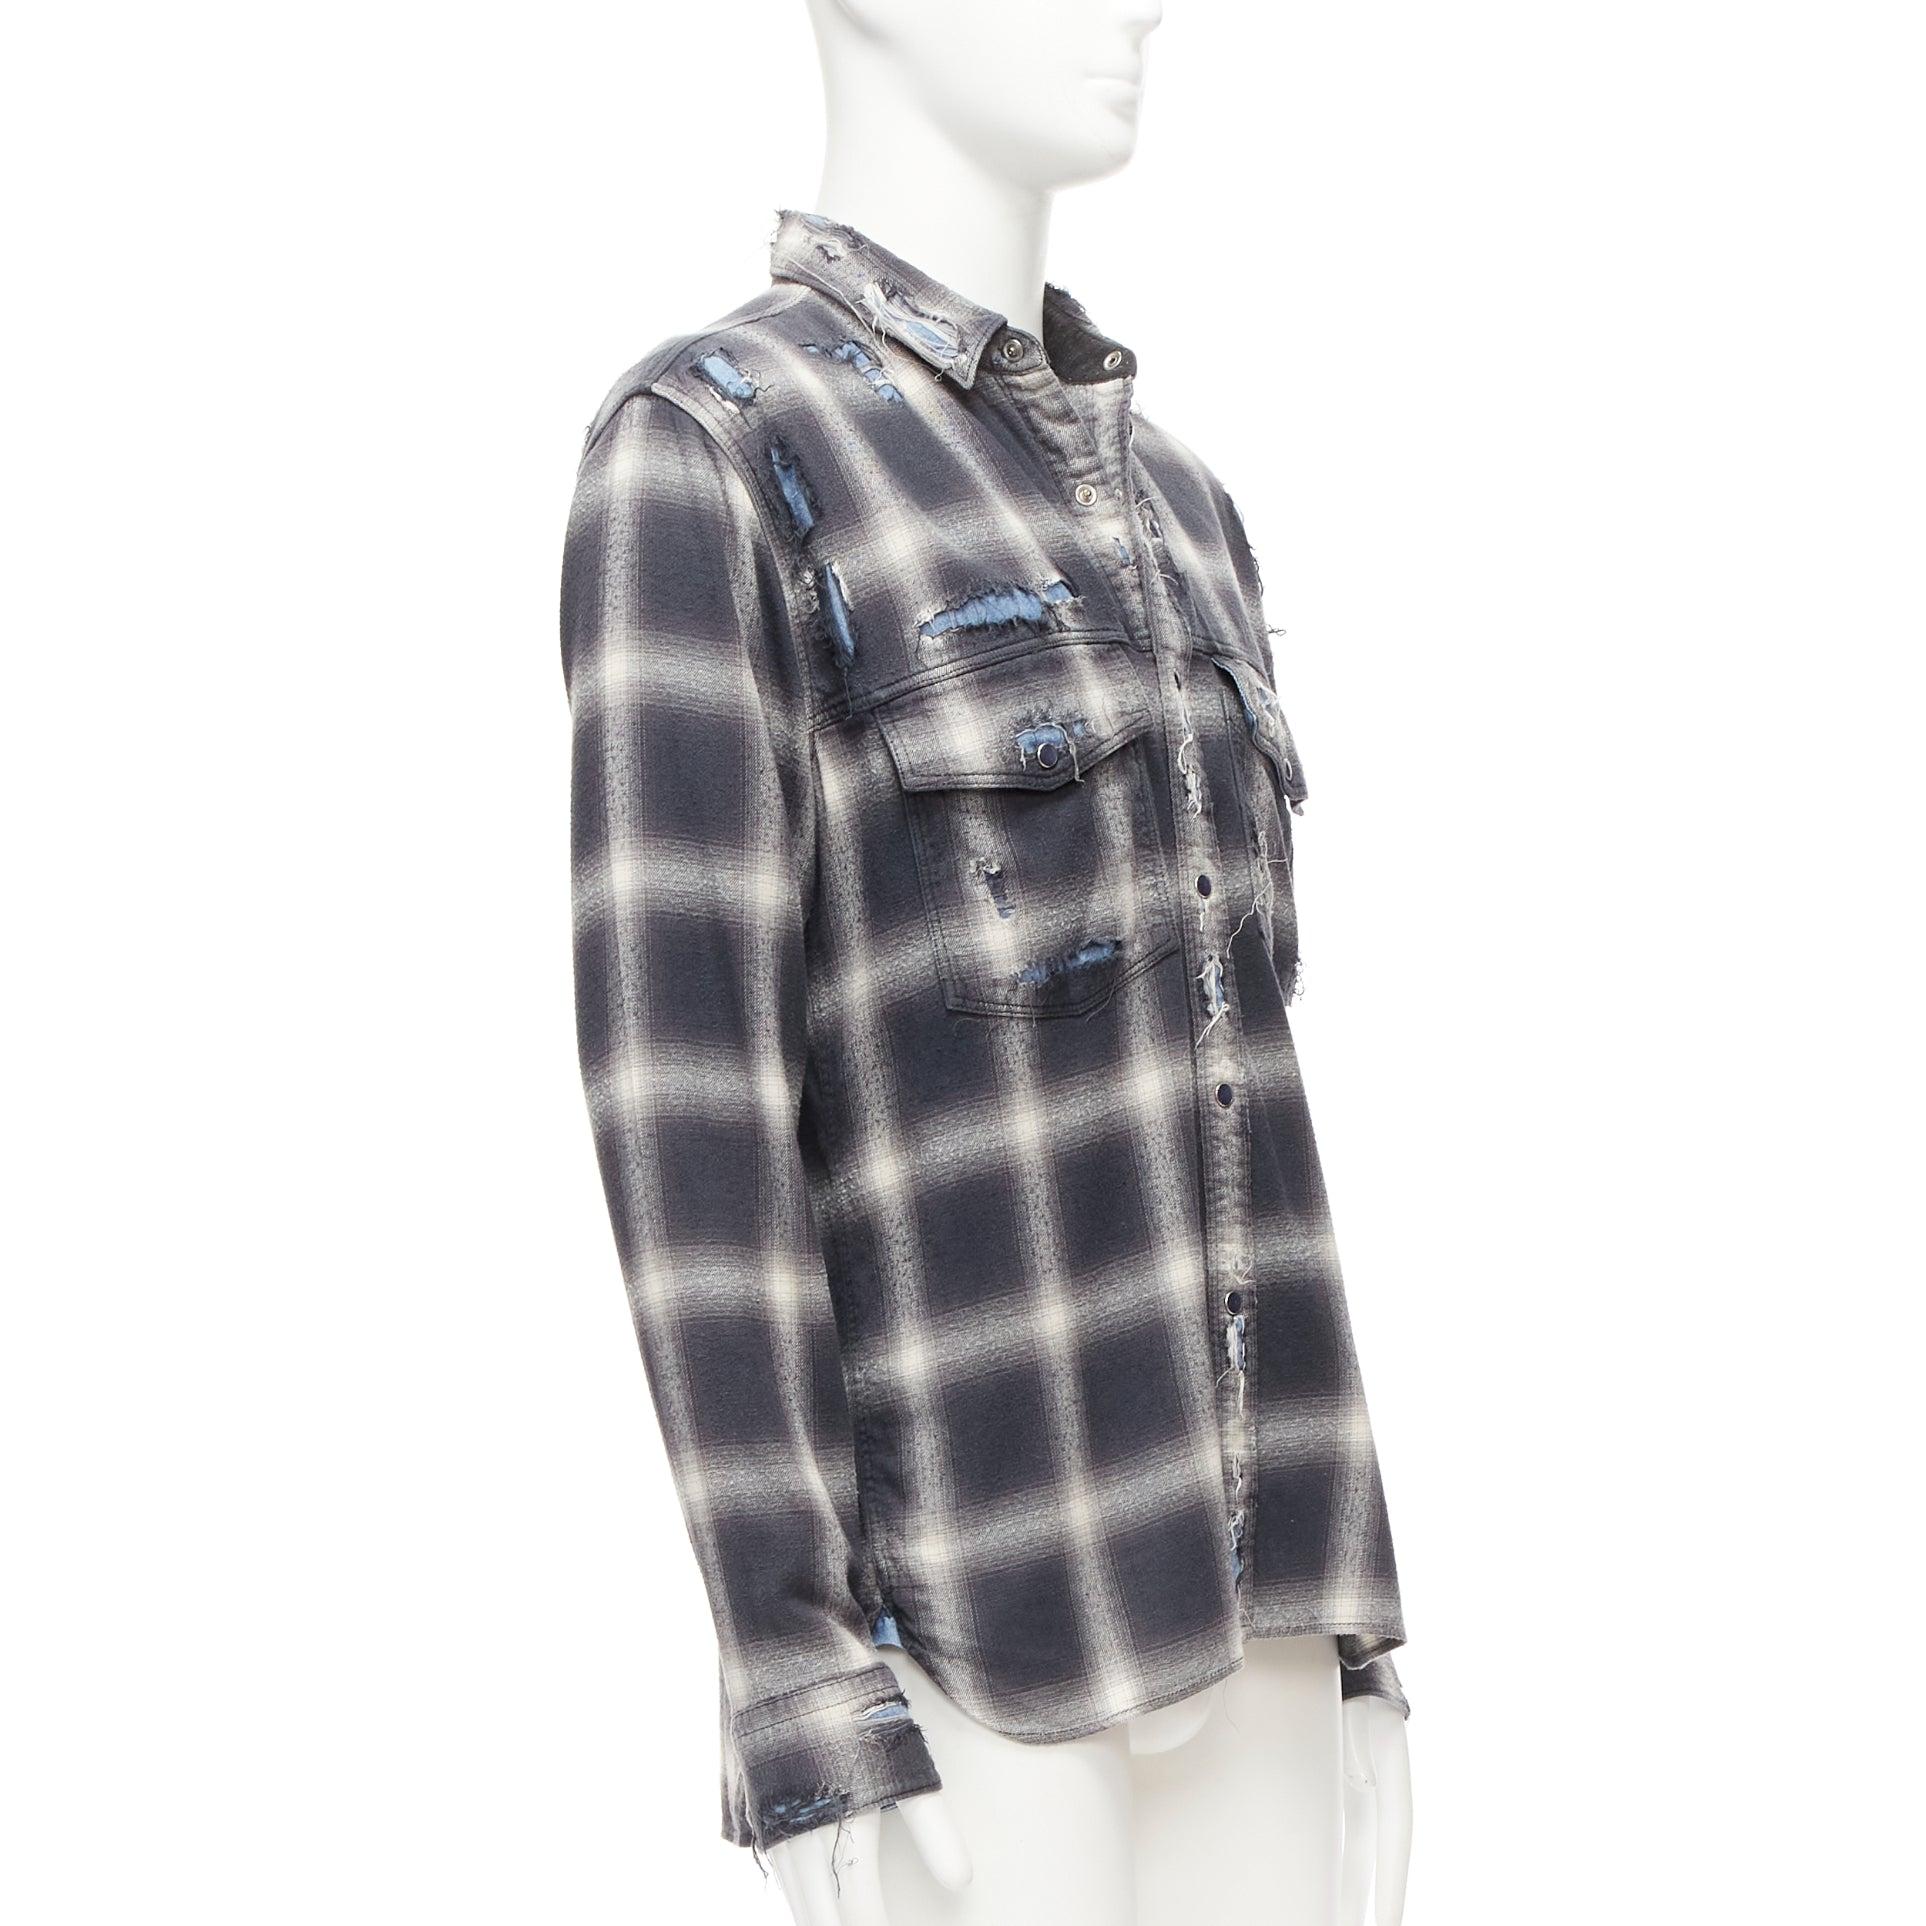 MIHARA YASUHIRO distressed grey plaid overlay blue casual shirt FR50 L
Reference: CNLE/A00291
Brand: Mihara Yasuhiro
Material: Cotton, Blend
Color: Grey, Blue
Pattern: Plaid
Closure: Snap Buttons
Extra Details: Blue plastic snap buttons. Micro